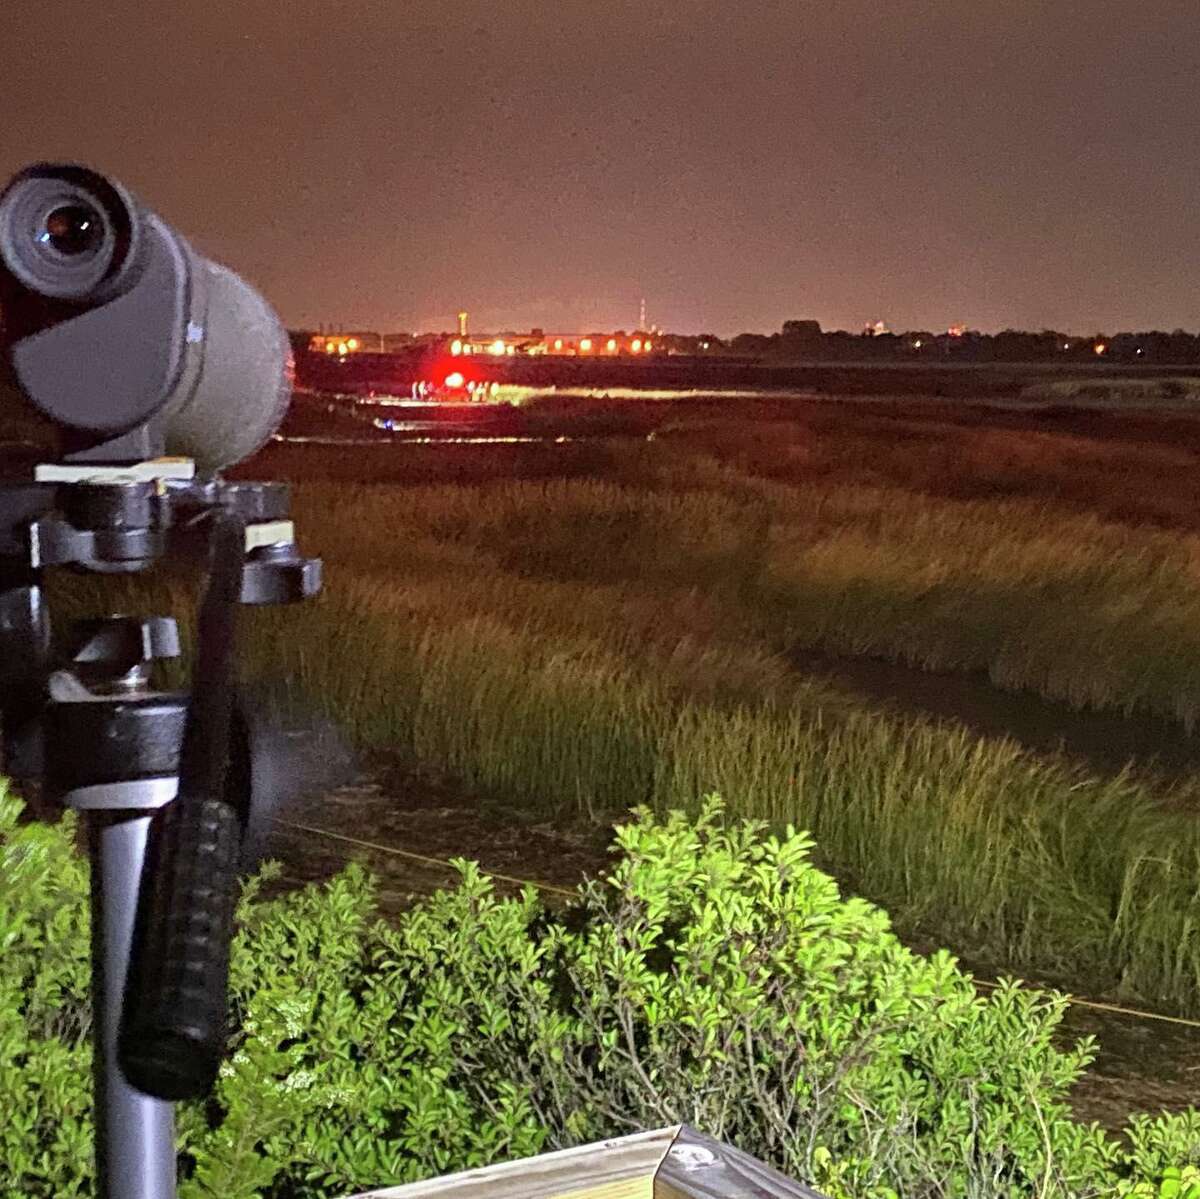 It took fire crews nearly two hours to free a fisherman trapped in mud in the marshlands off of Smith’s Point in Milford, Conn, on Wednesday, Sept. 8, 2021.